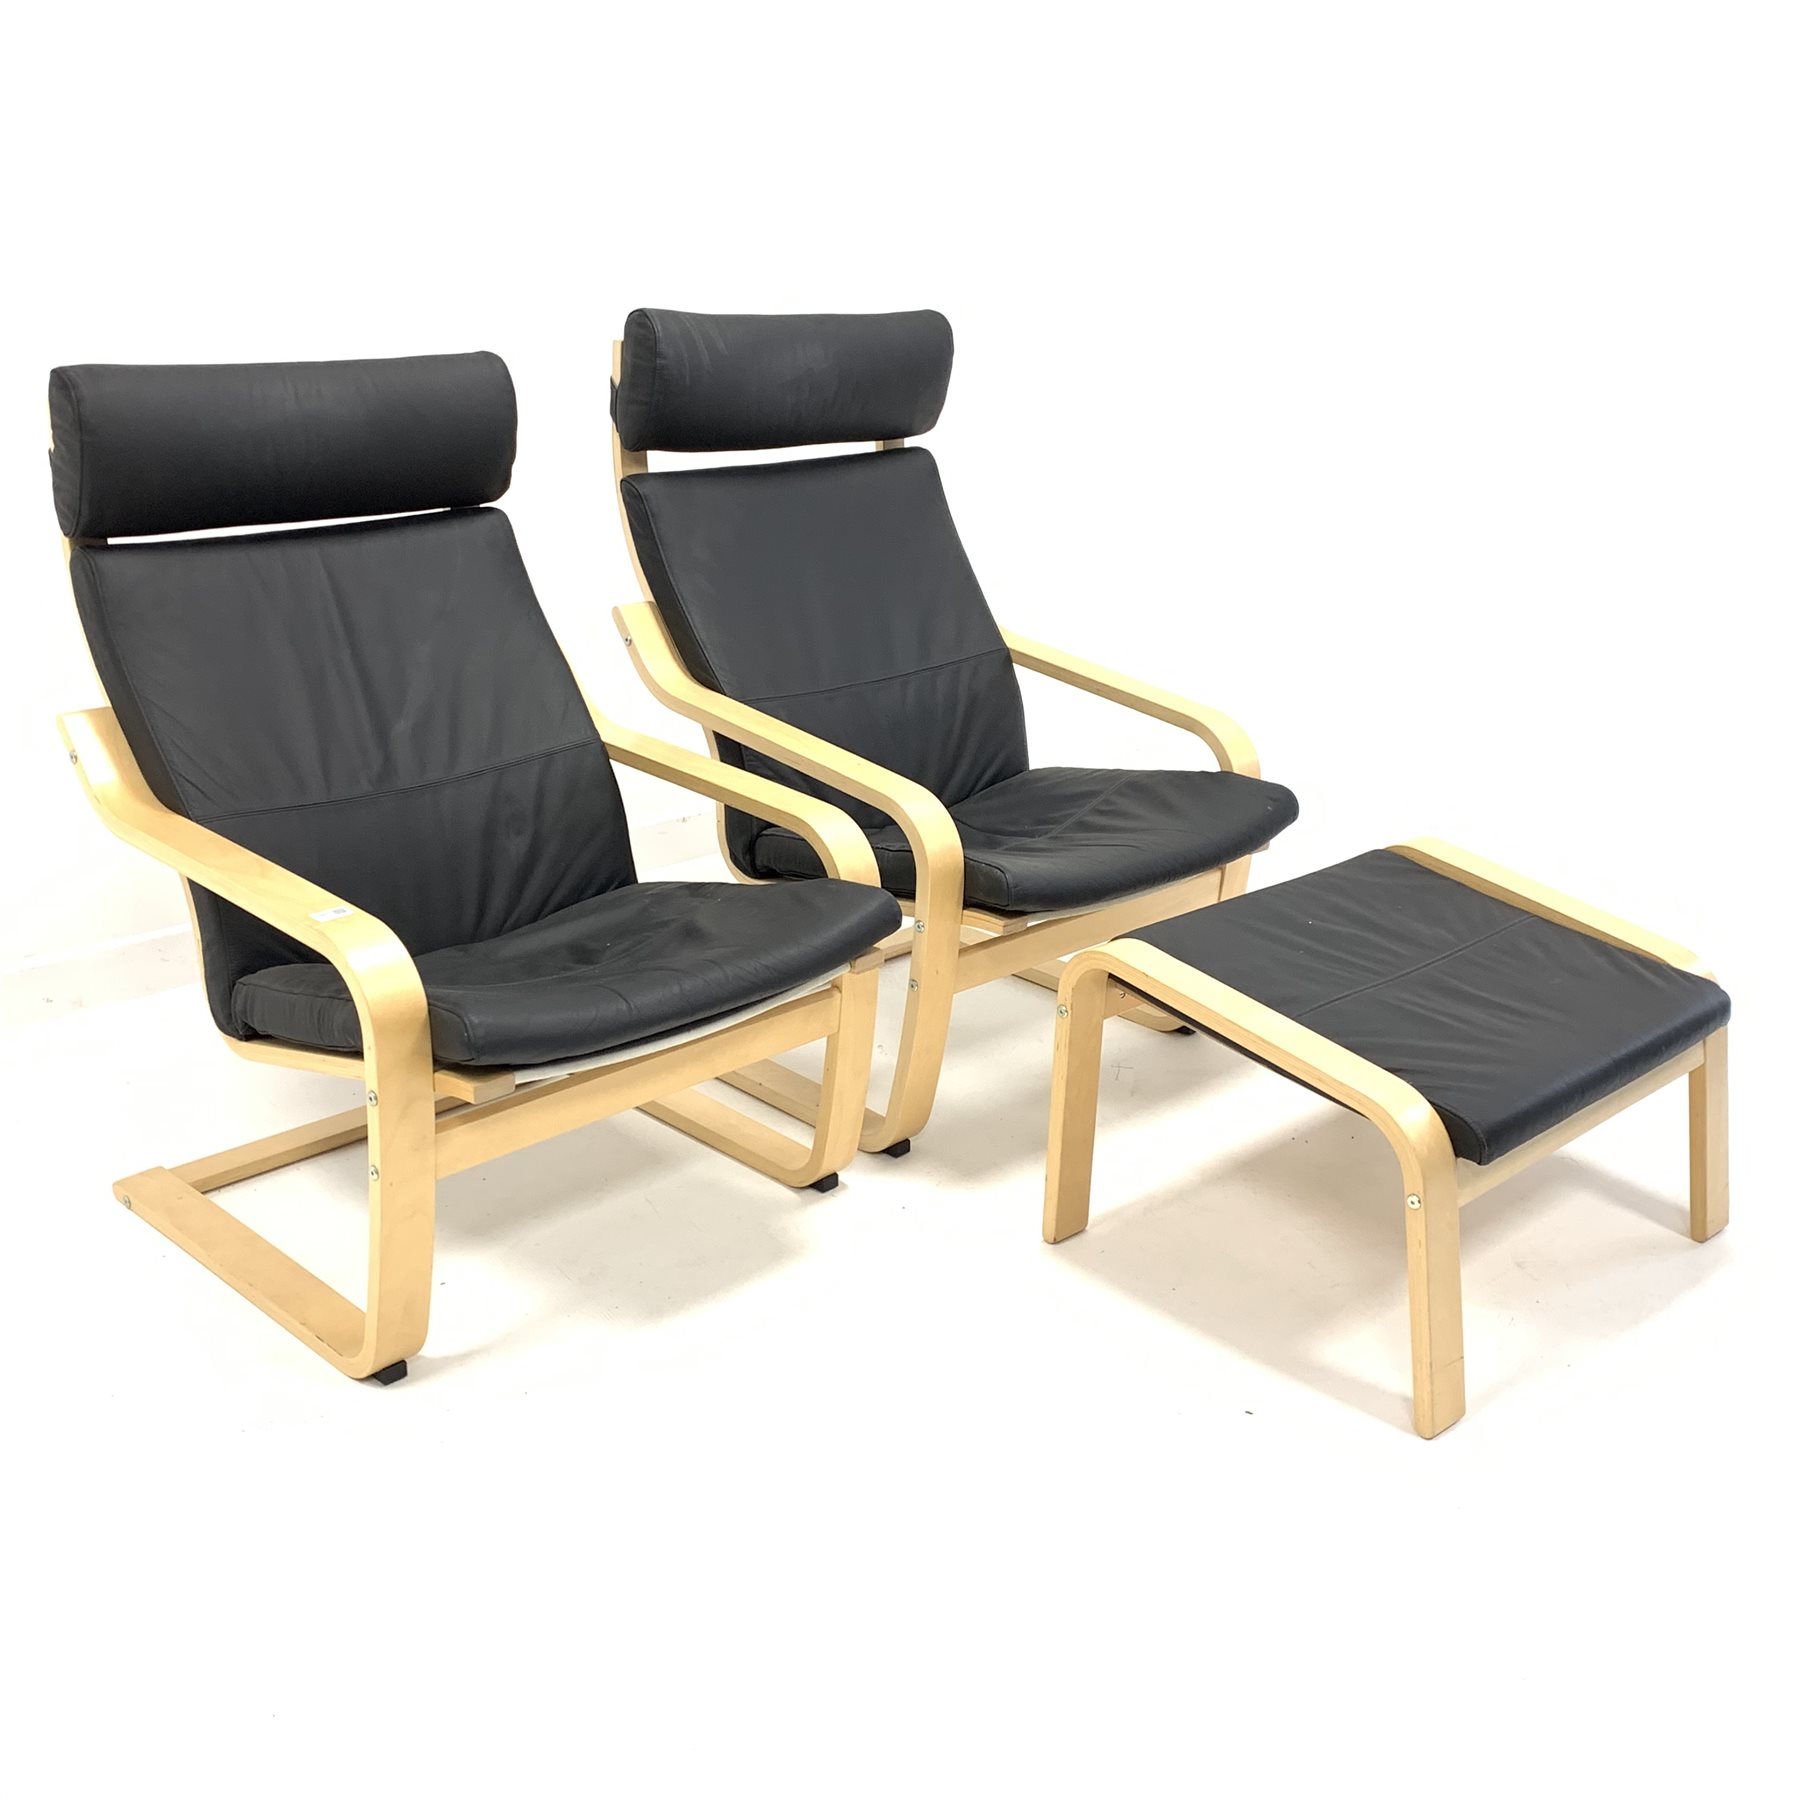 Pair of 'Ikea Poang' lounge chairs with leather upholstered cushions